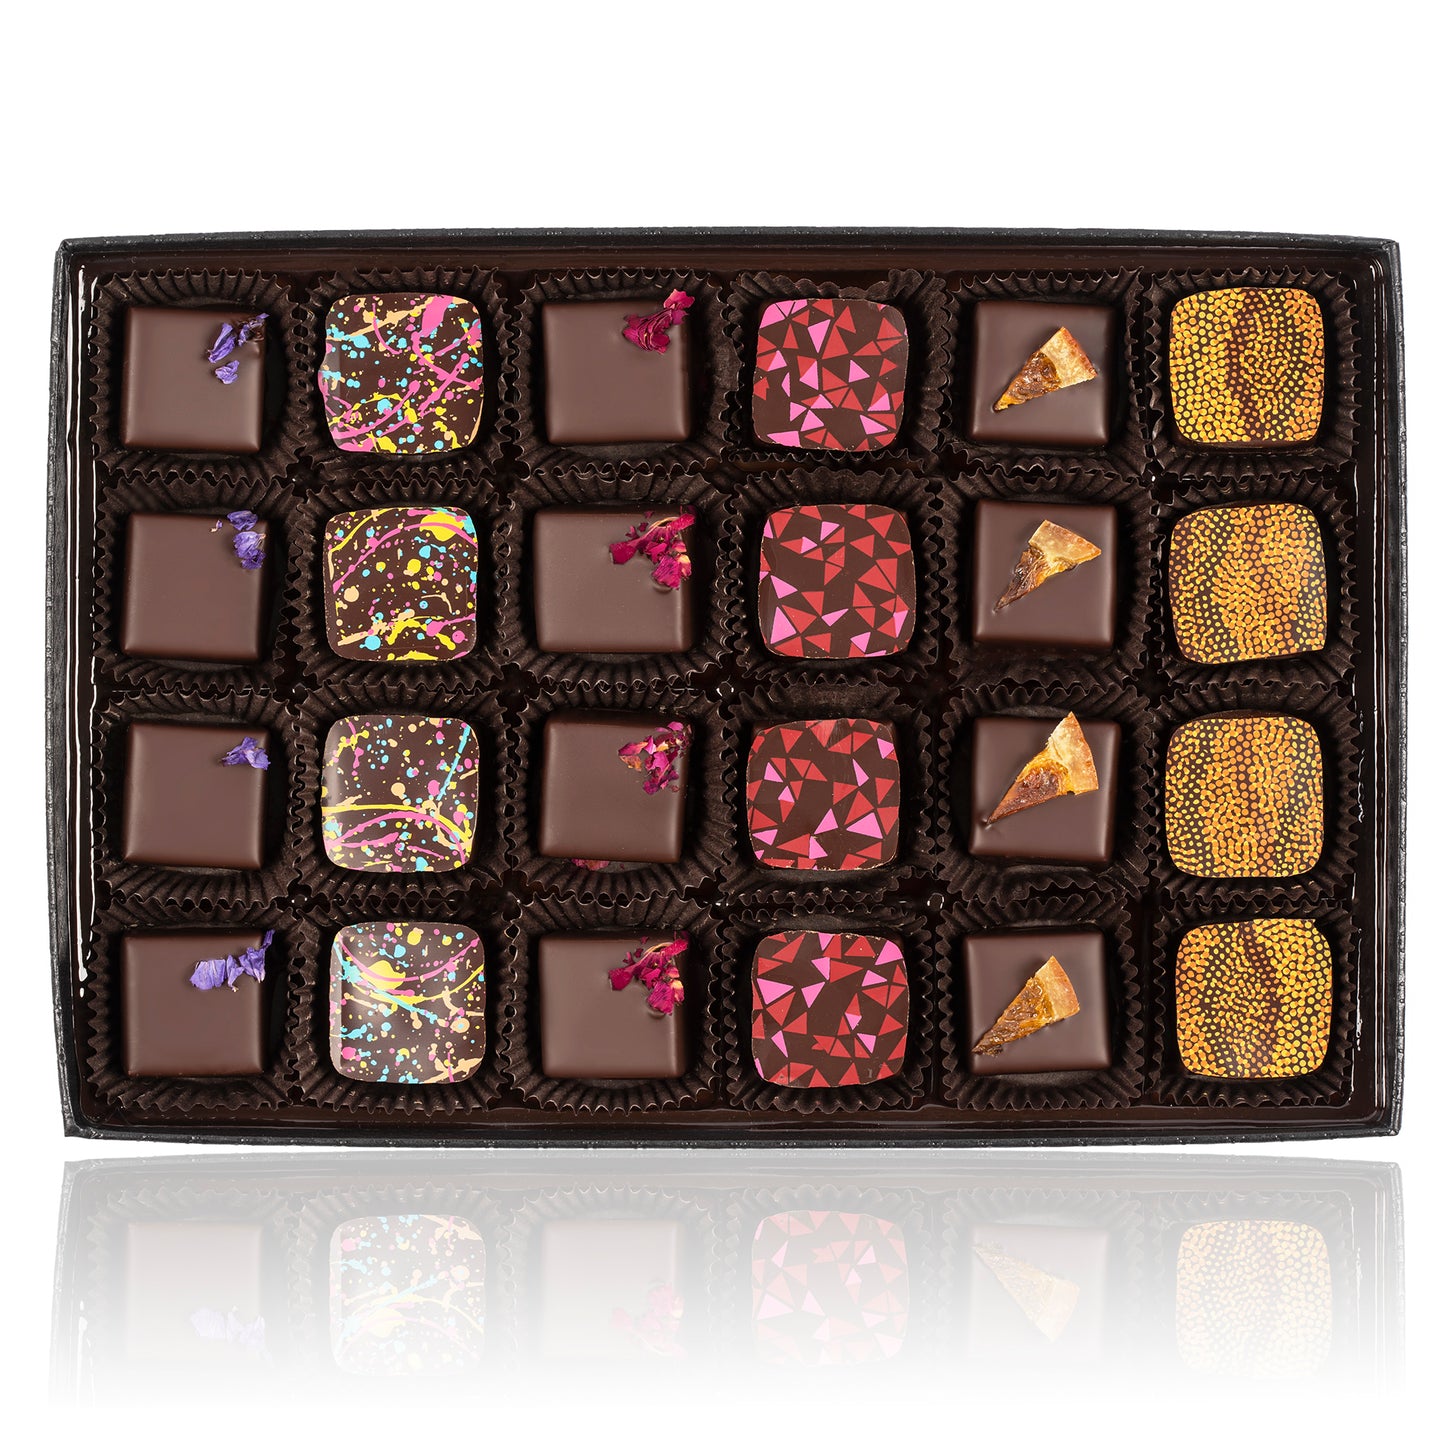 Truffle Collection - Quilted Box - 24pcs. Vegan. Gluten Free. Kosher Parve